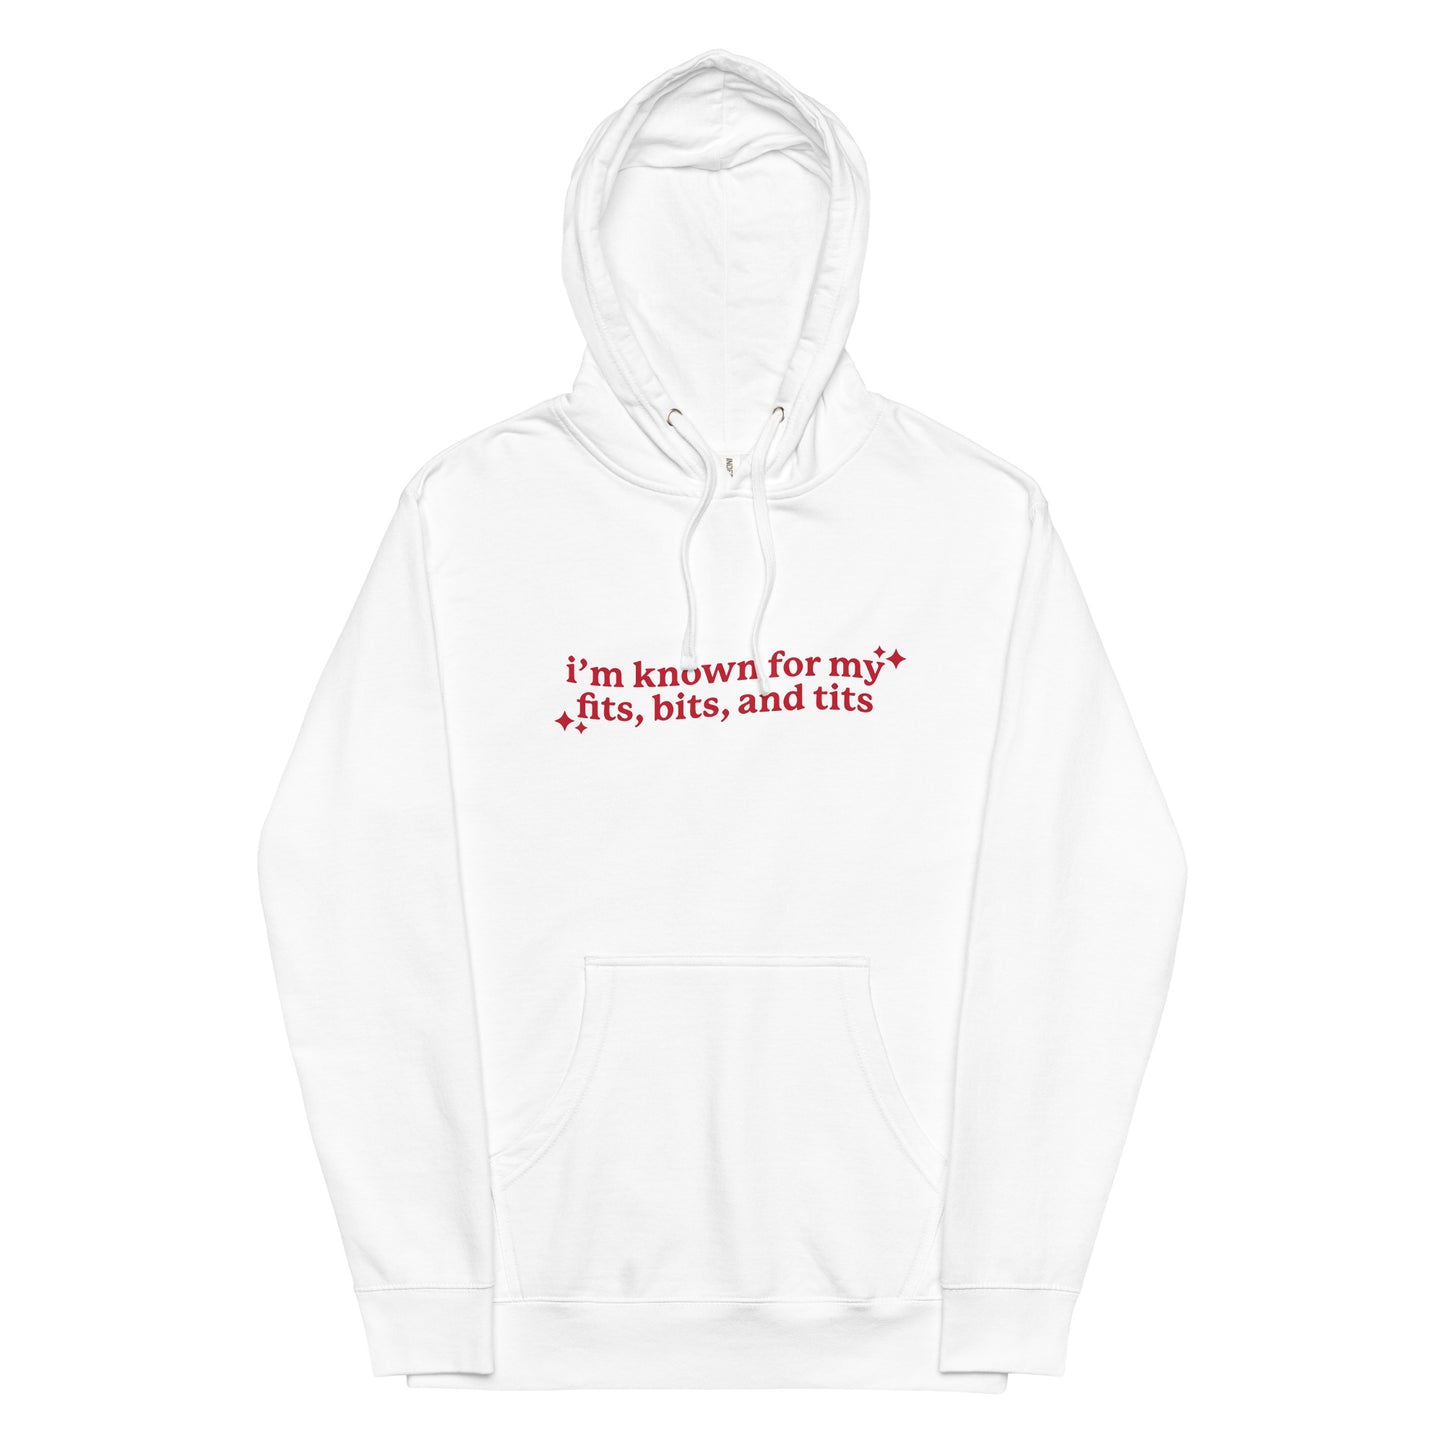 I'm Known For My Fits, Bits, and Tits Unisex hoodie